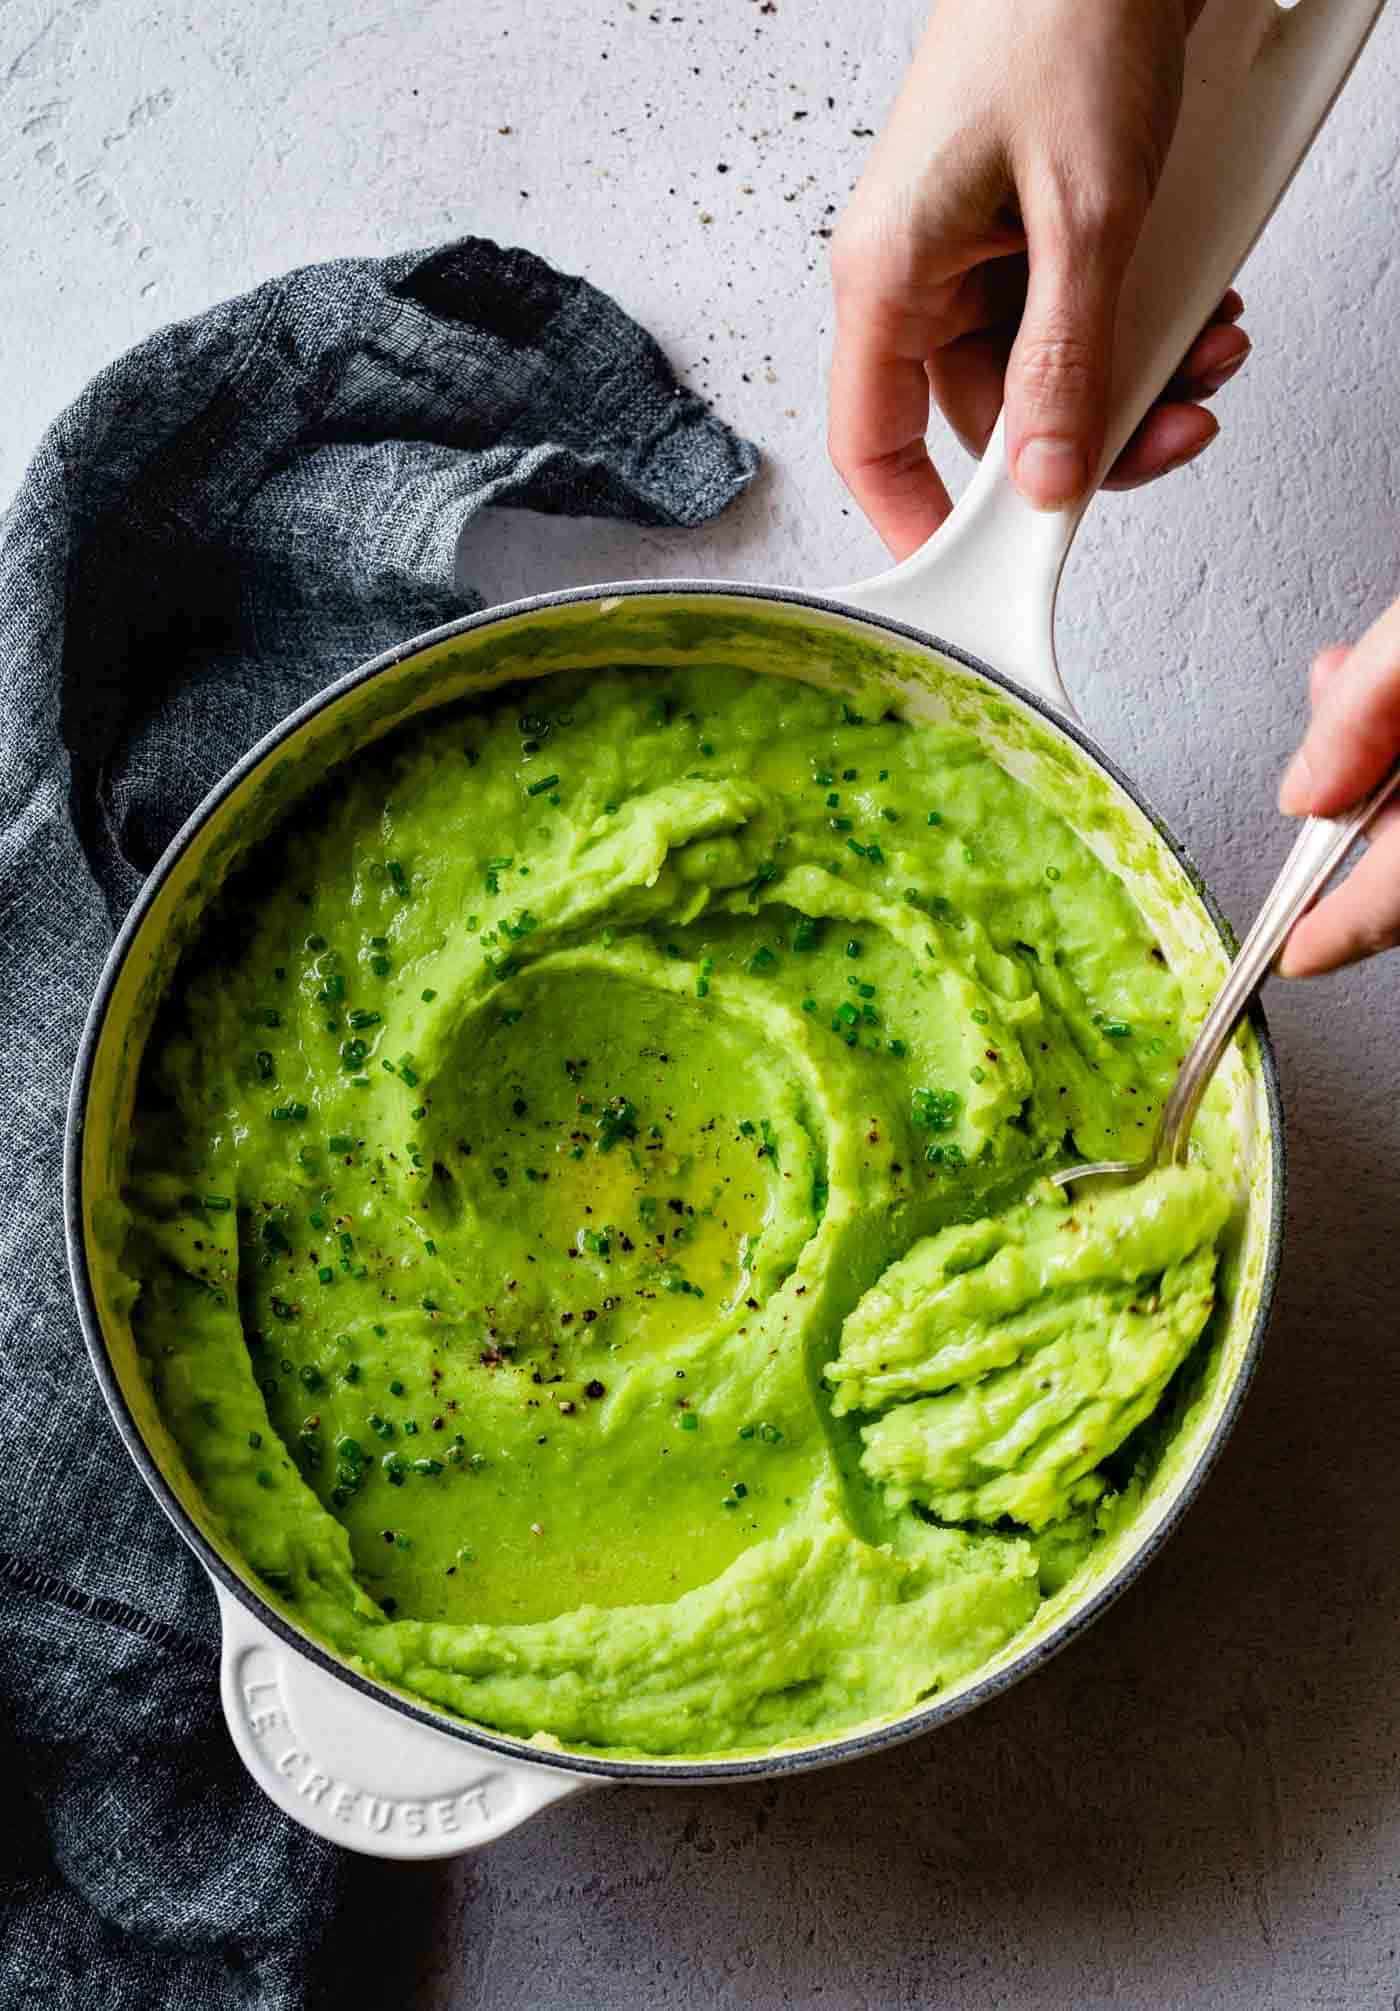 Spooning Green Mashed Potatoes from a pot